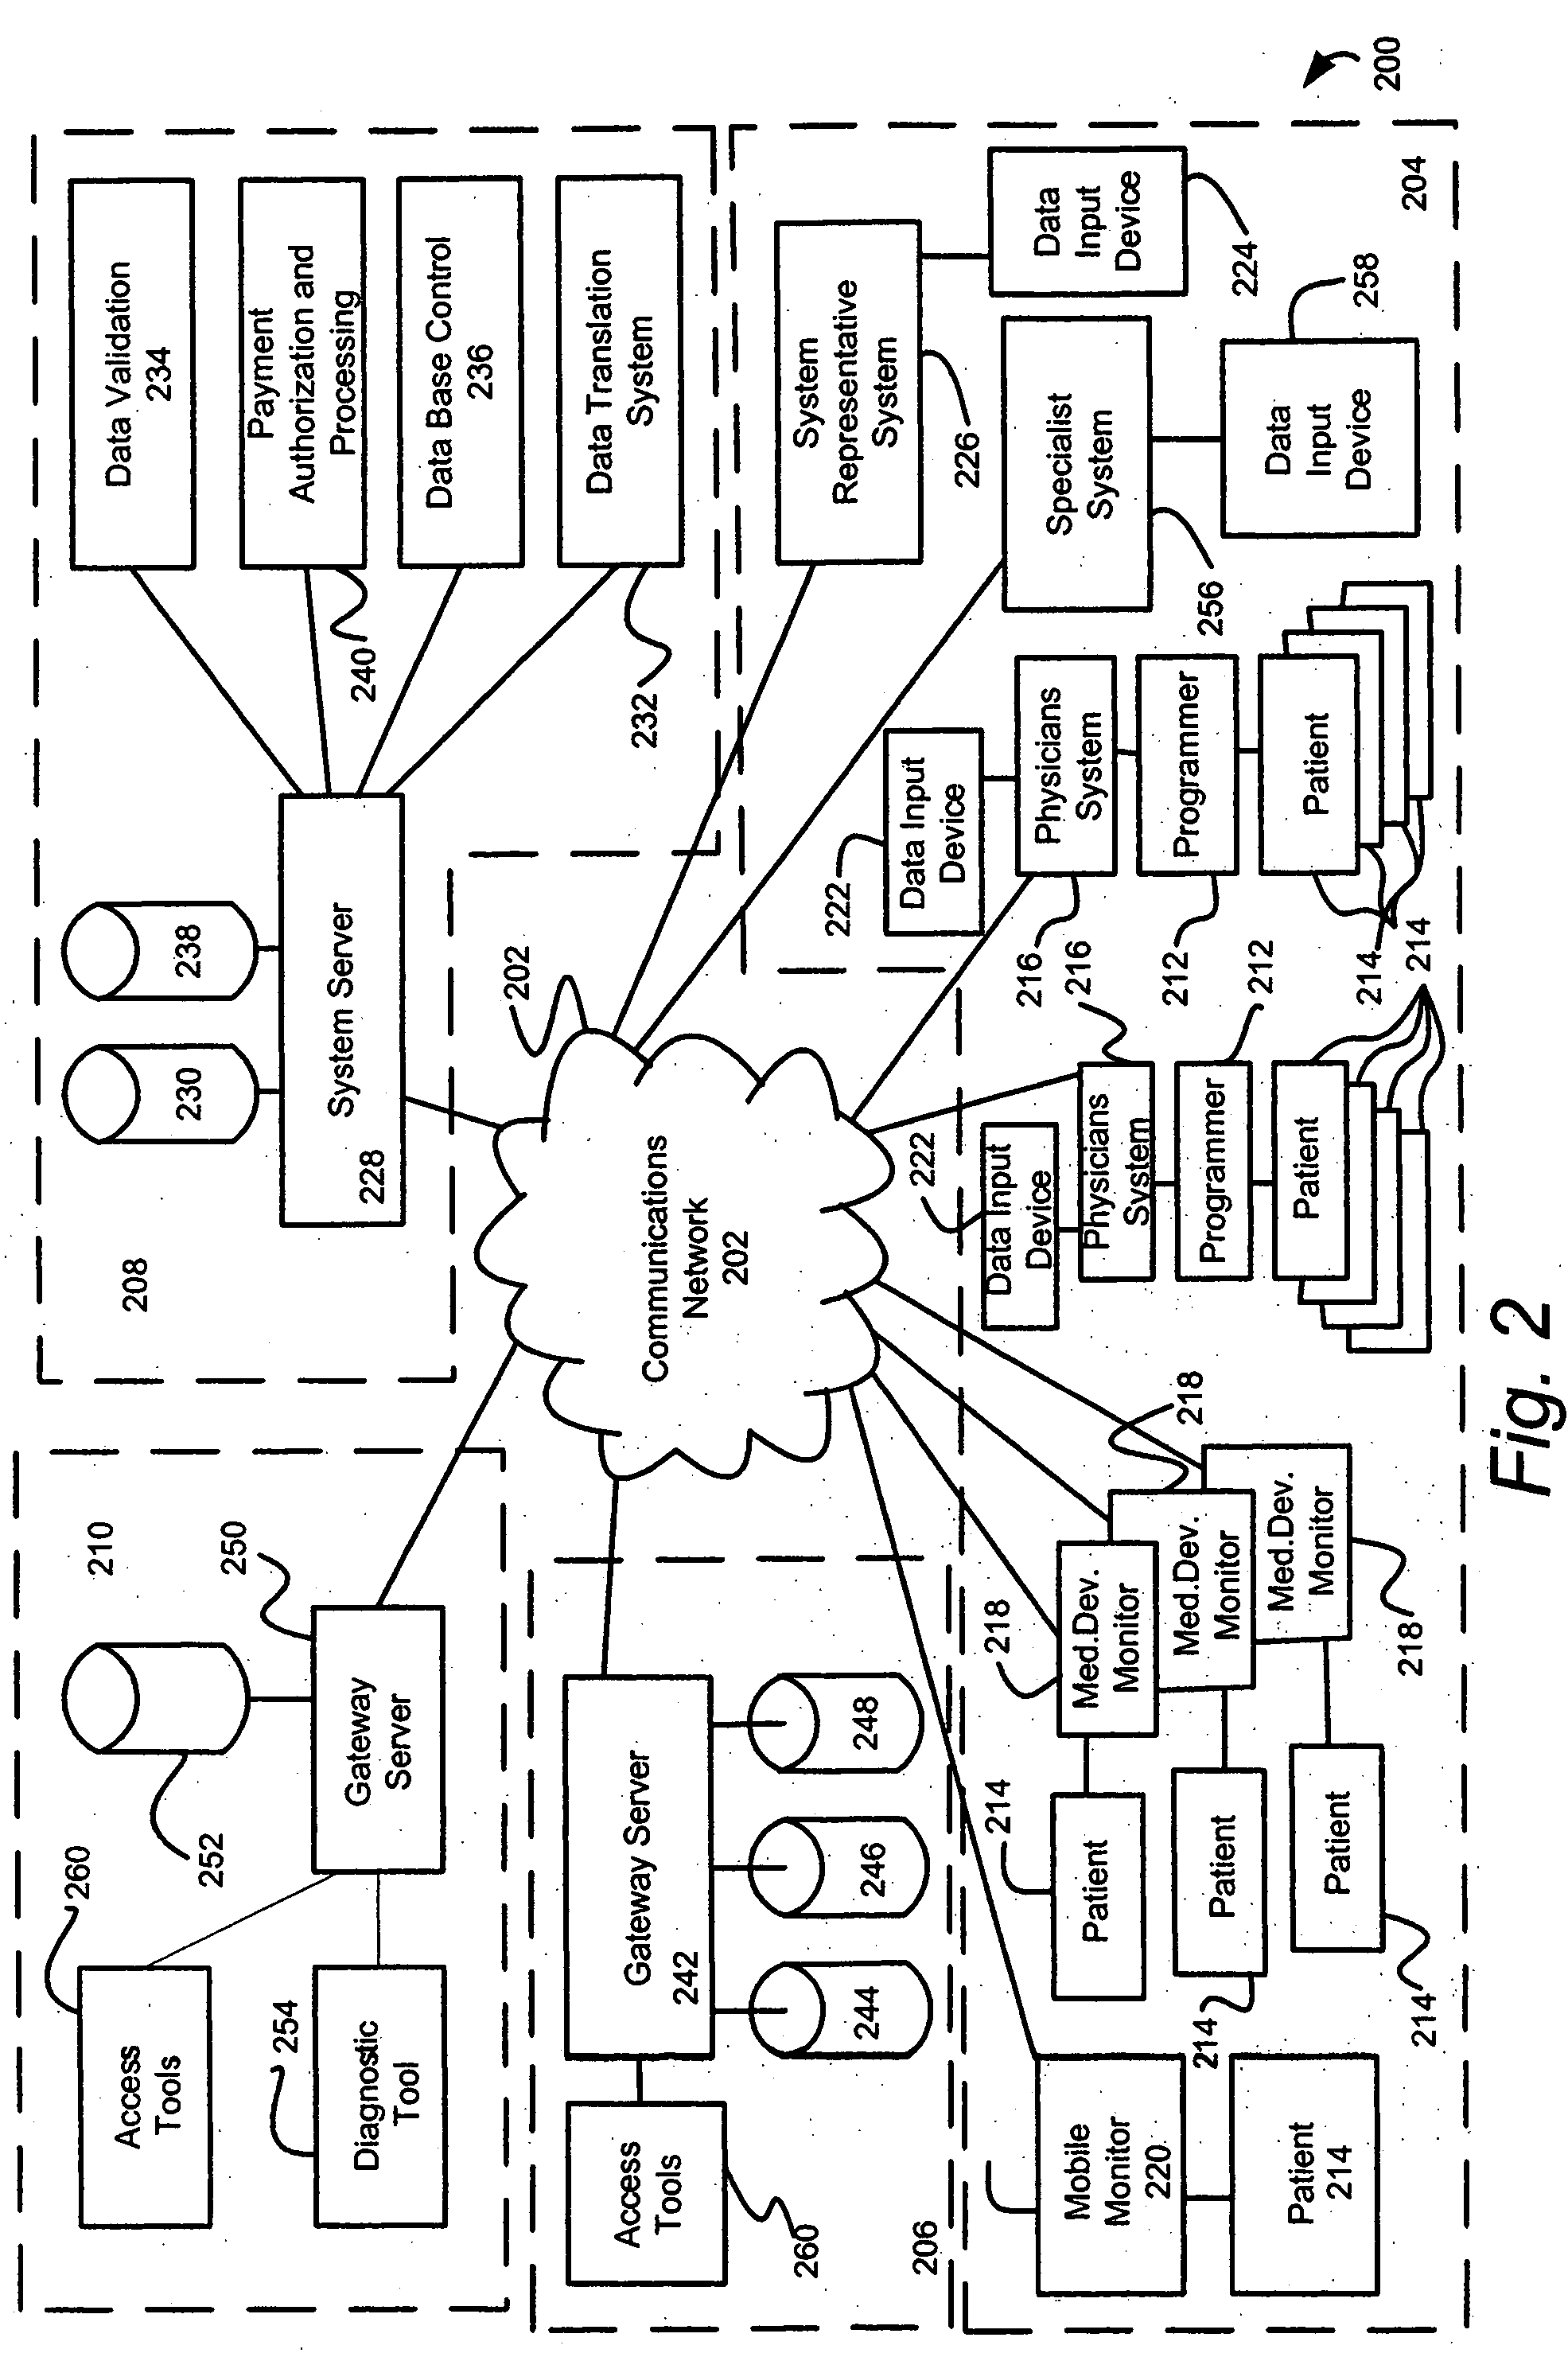 Systems and methods for automatically collecting, formatting, and storing medical device data in a database